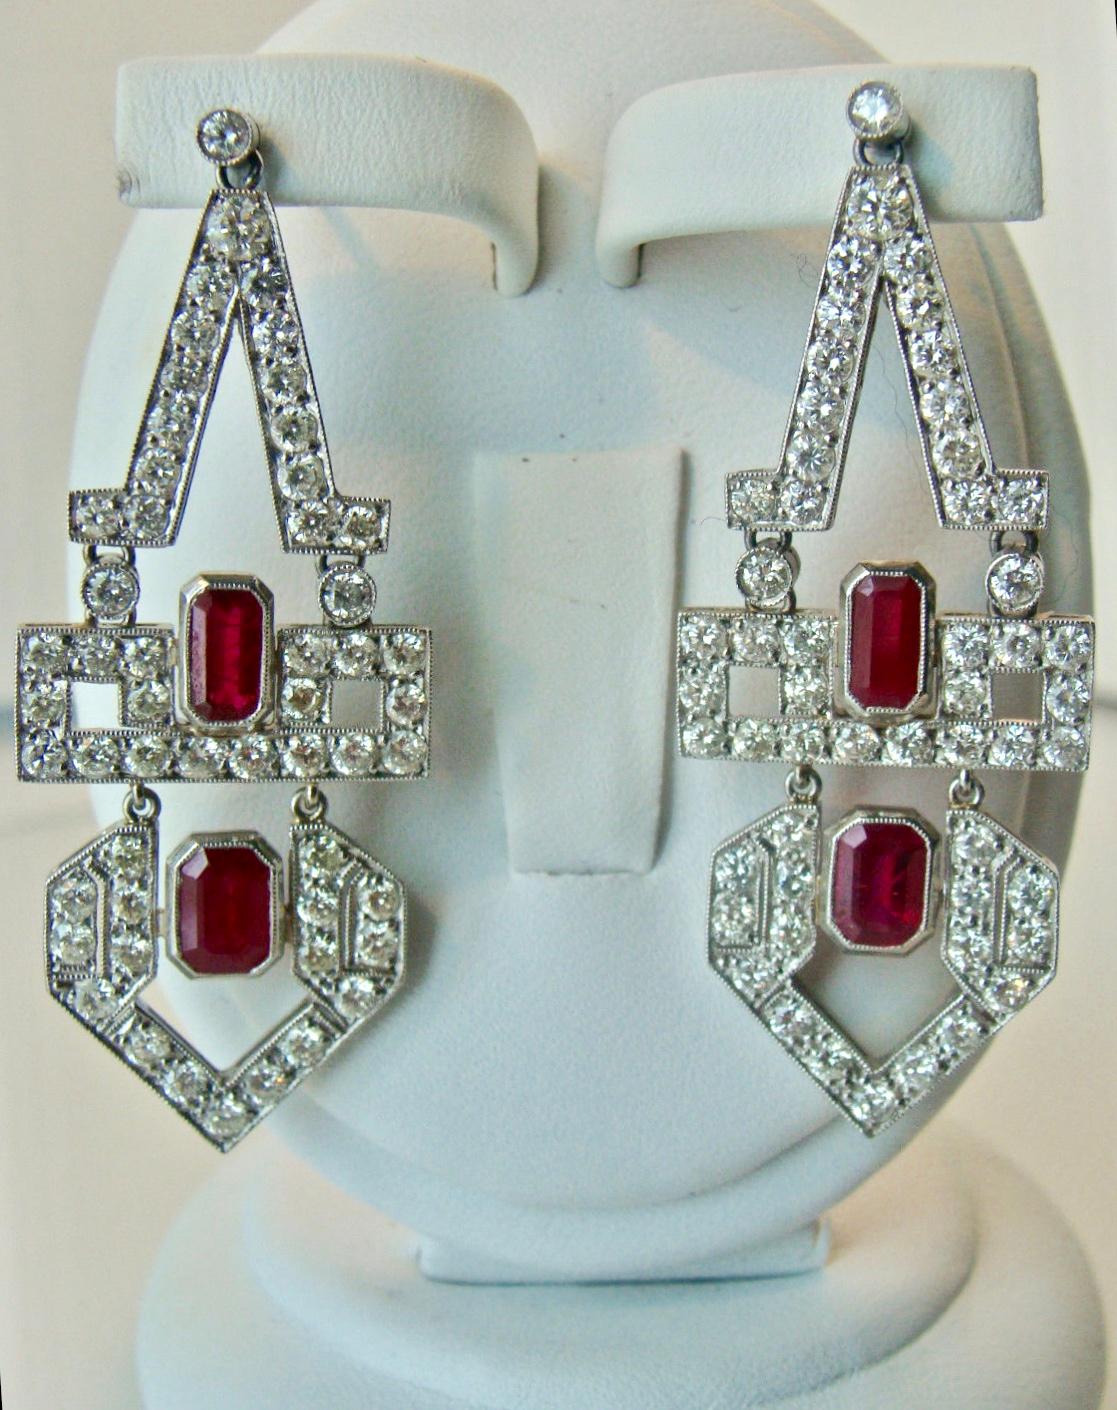 Spectacular Art Deco Style 8.0 Carats Natural Ruby Diamond Platinum Dangle Drop Earrings
Total Diamond Weight : Approx 4.00ct  VS-S1(106 Pave set Diamonds)
These Earrings feature 4 Genuine Emerald Cut Rubies
Total Ruby Weght : Approx